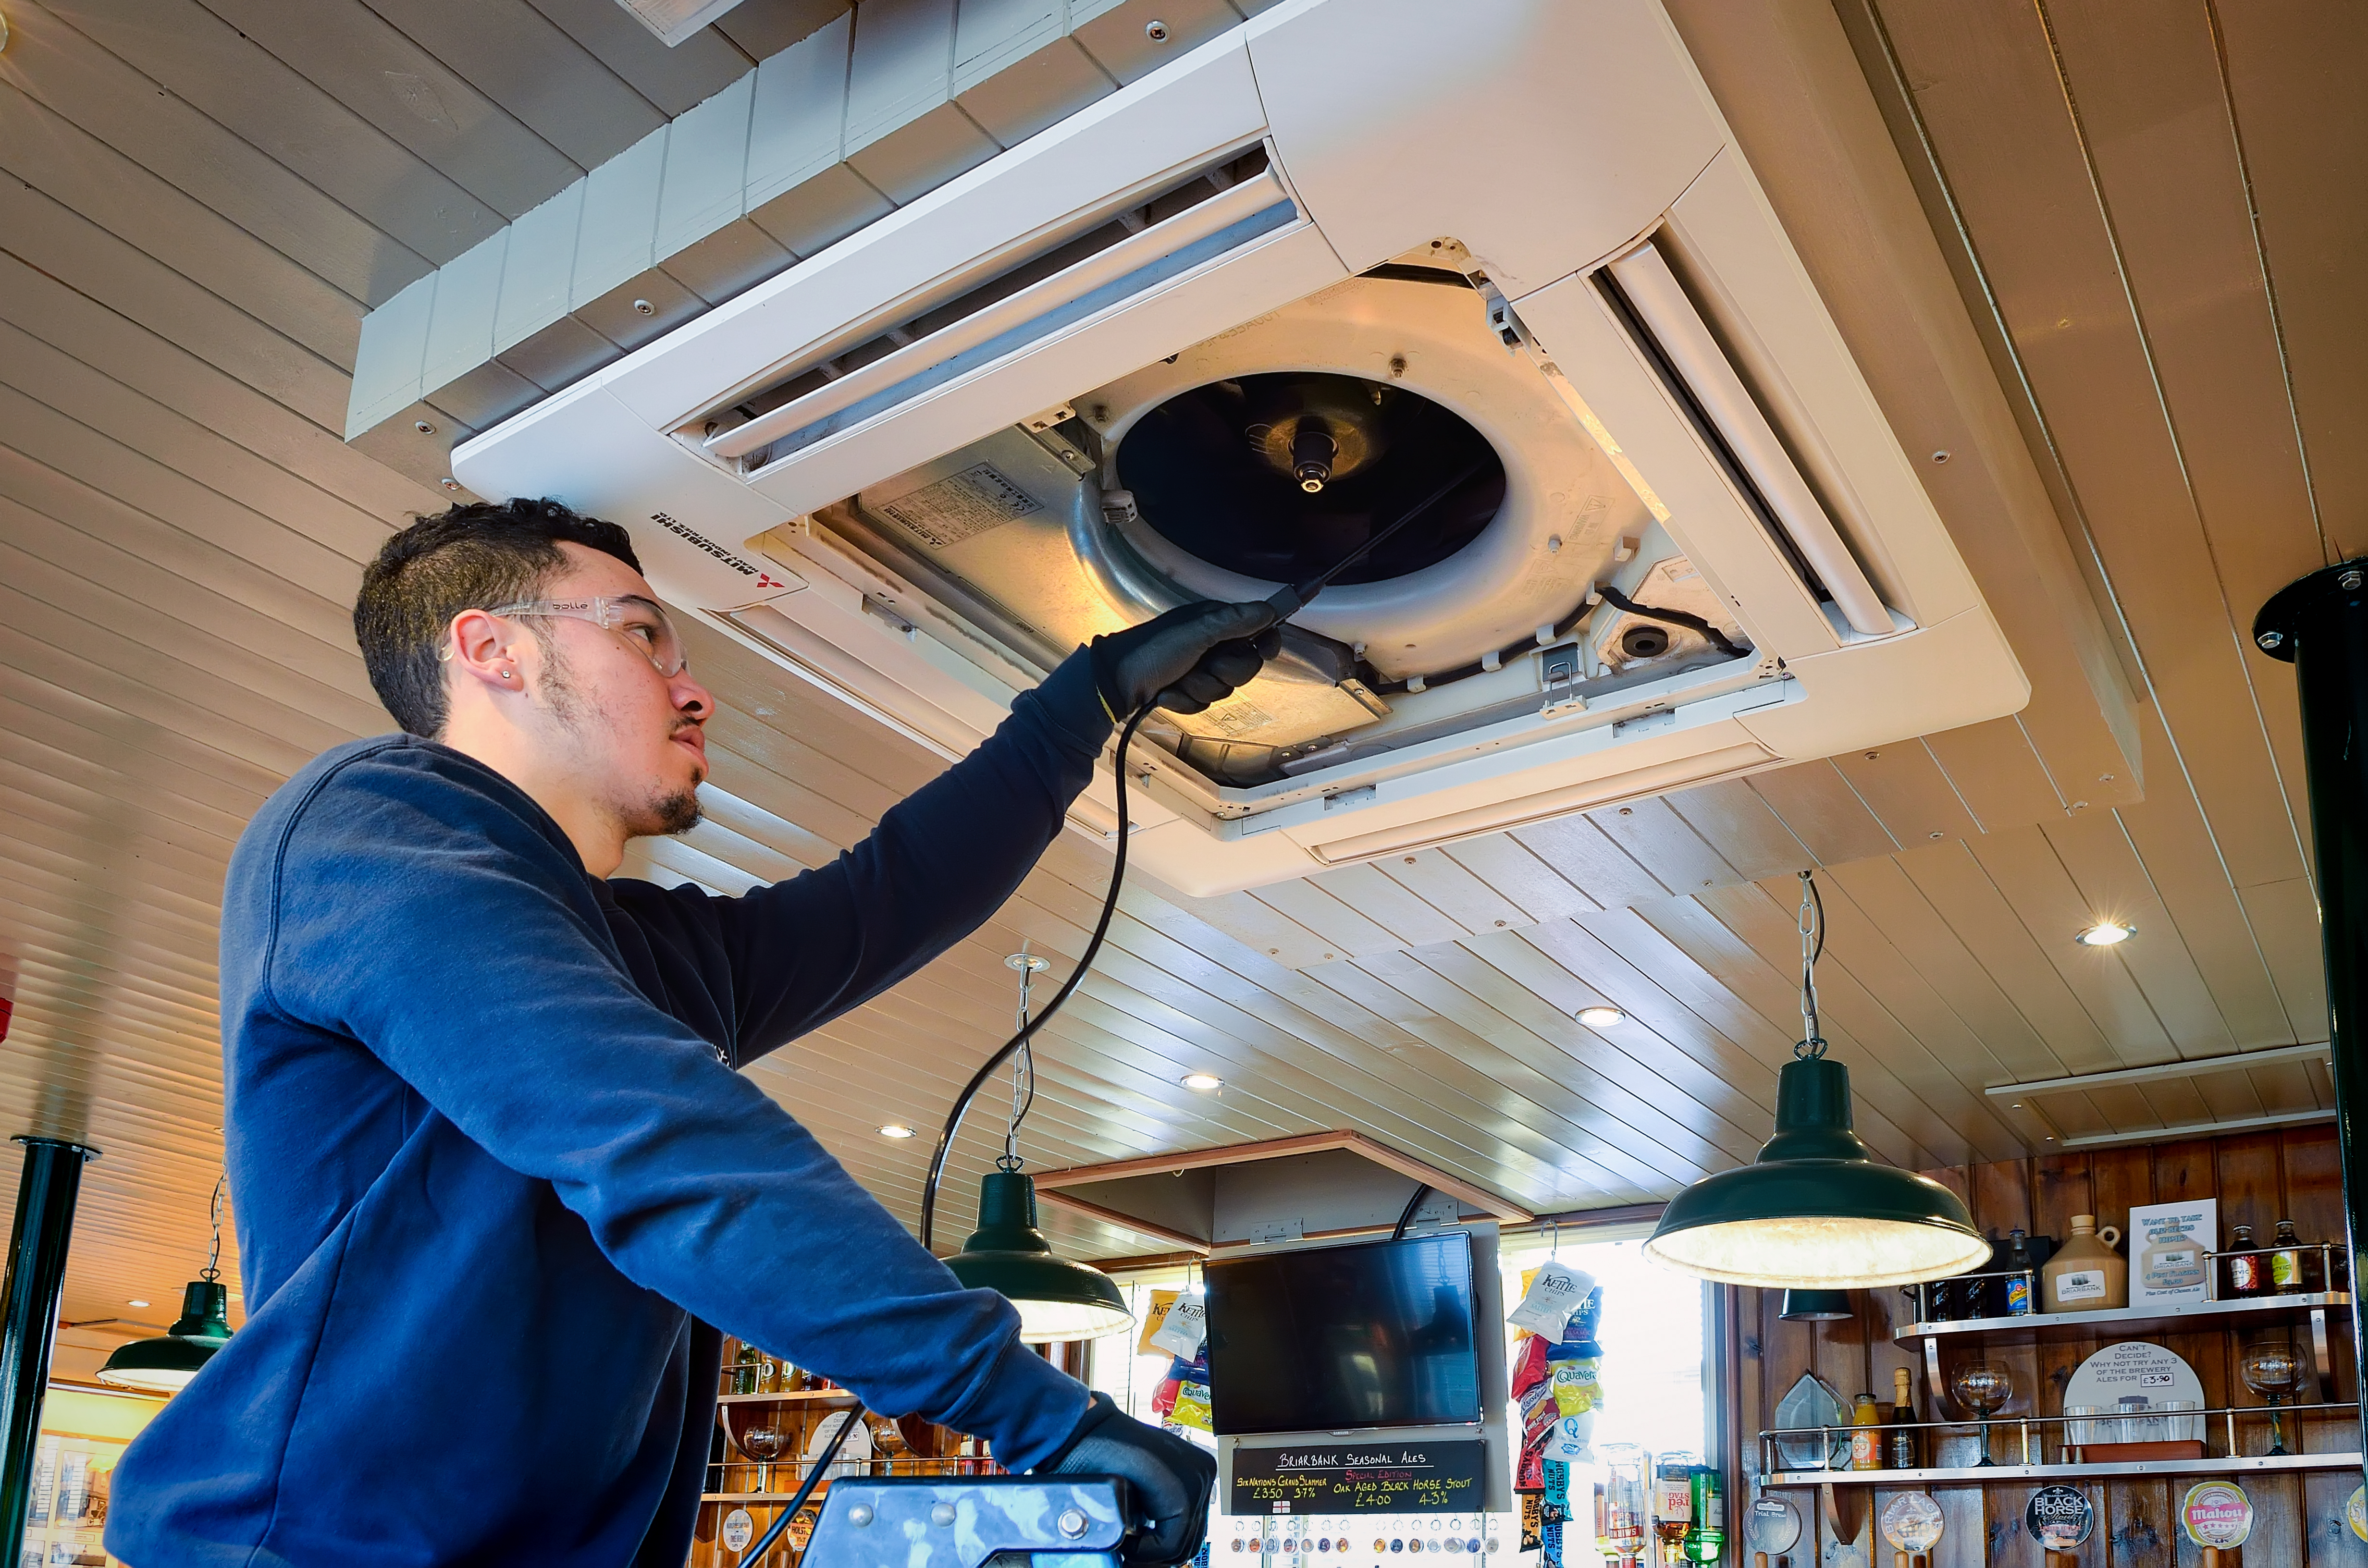 How Often Should Your Commercial Air Conditioning Be Serviced?